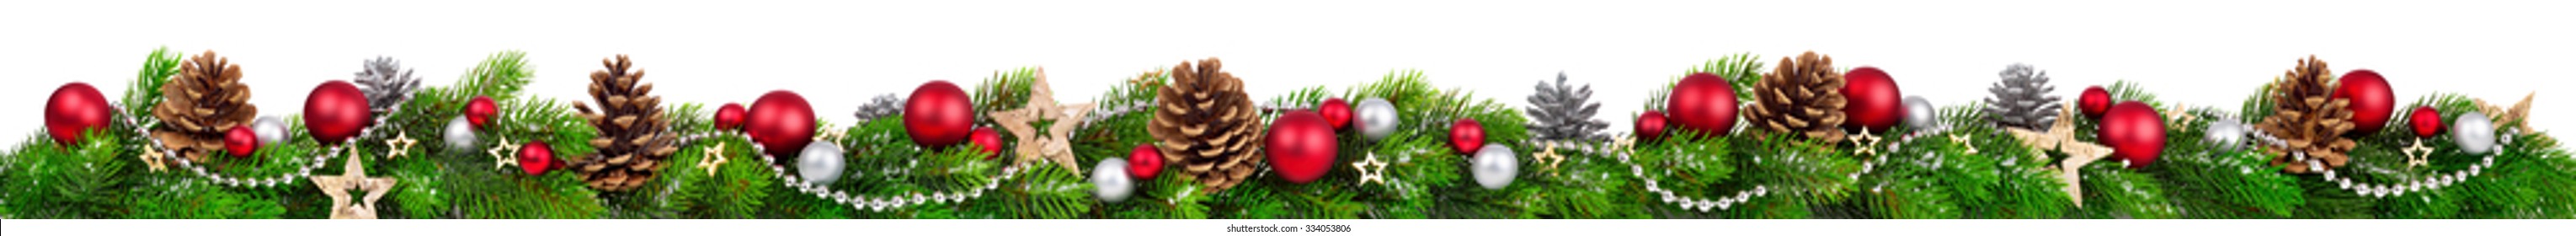 Extra wide Christmas border with fir branches, red and silver baubles, pine cones and other ornaments, isolated on white - Shutterstock ID 334053806